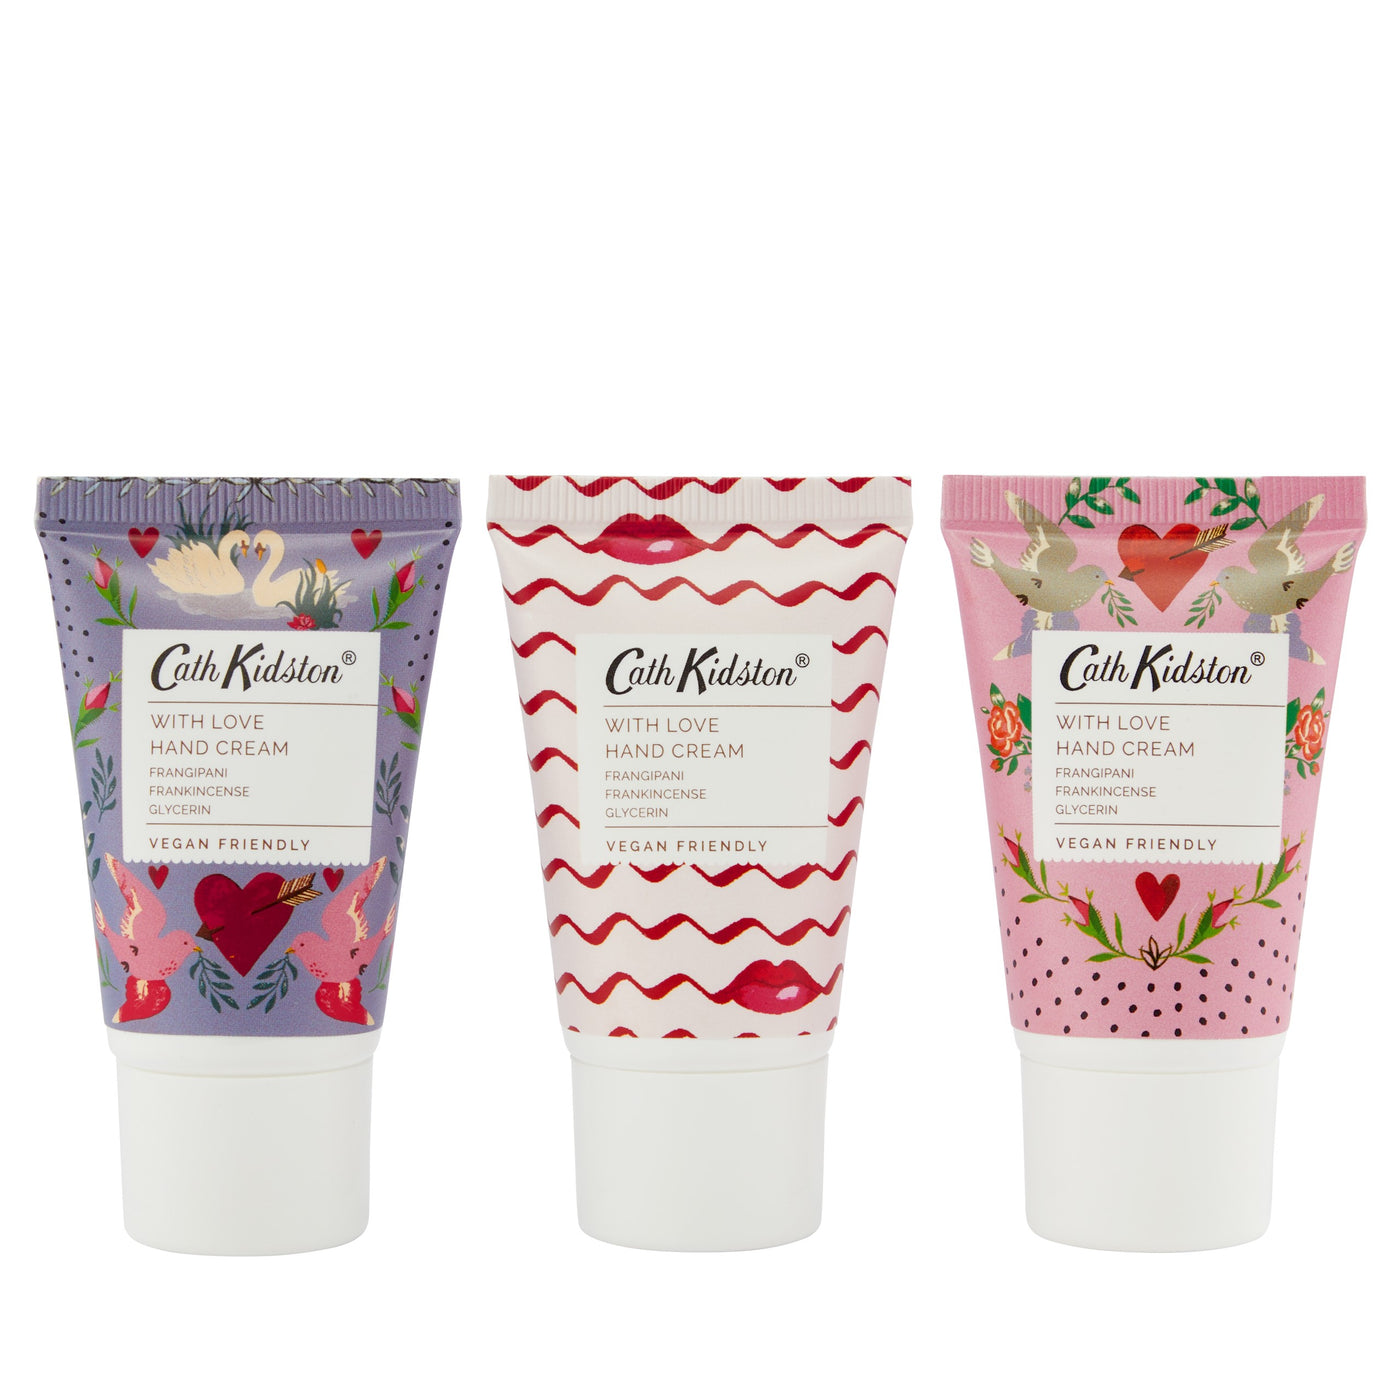 With Love Hand Creams